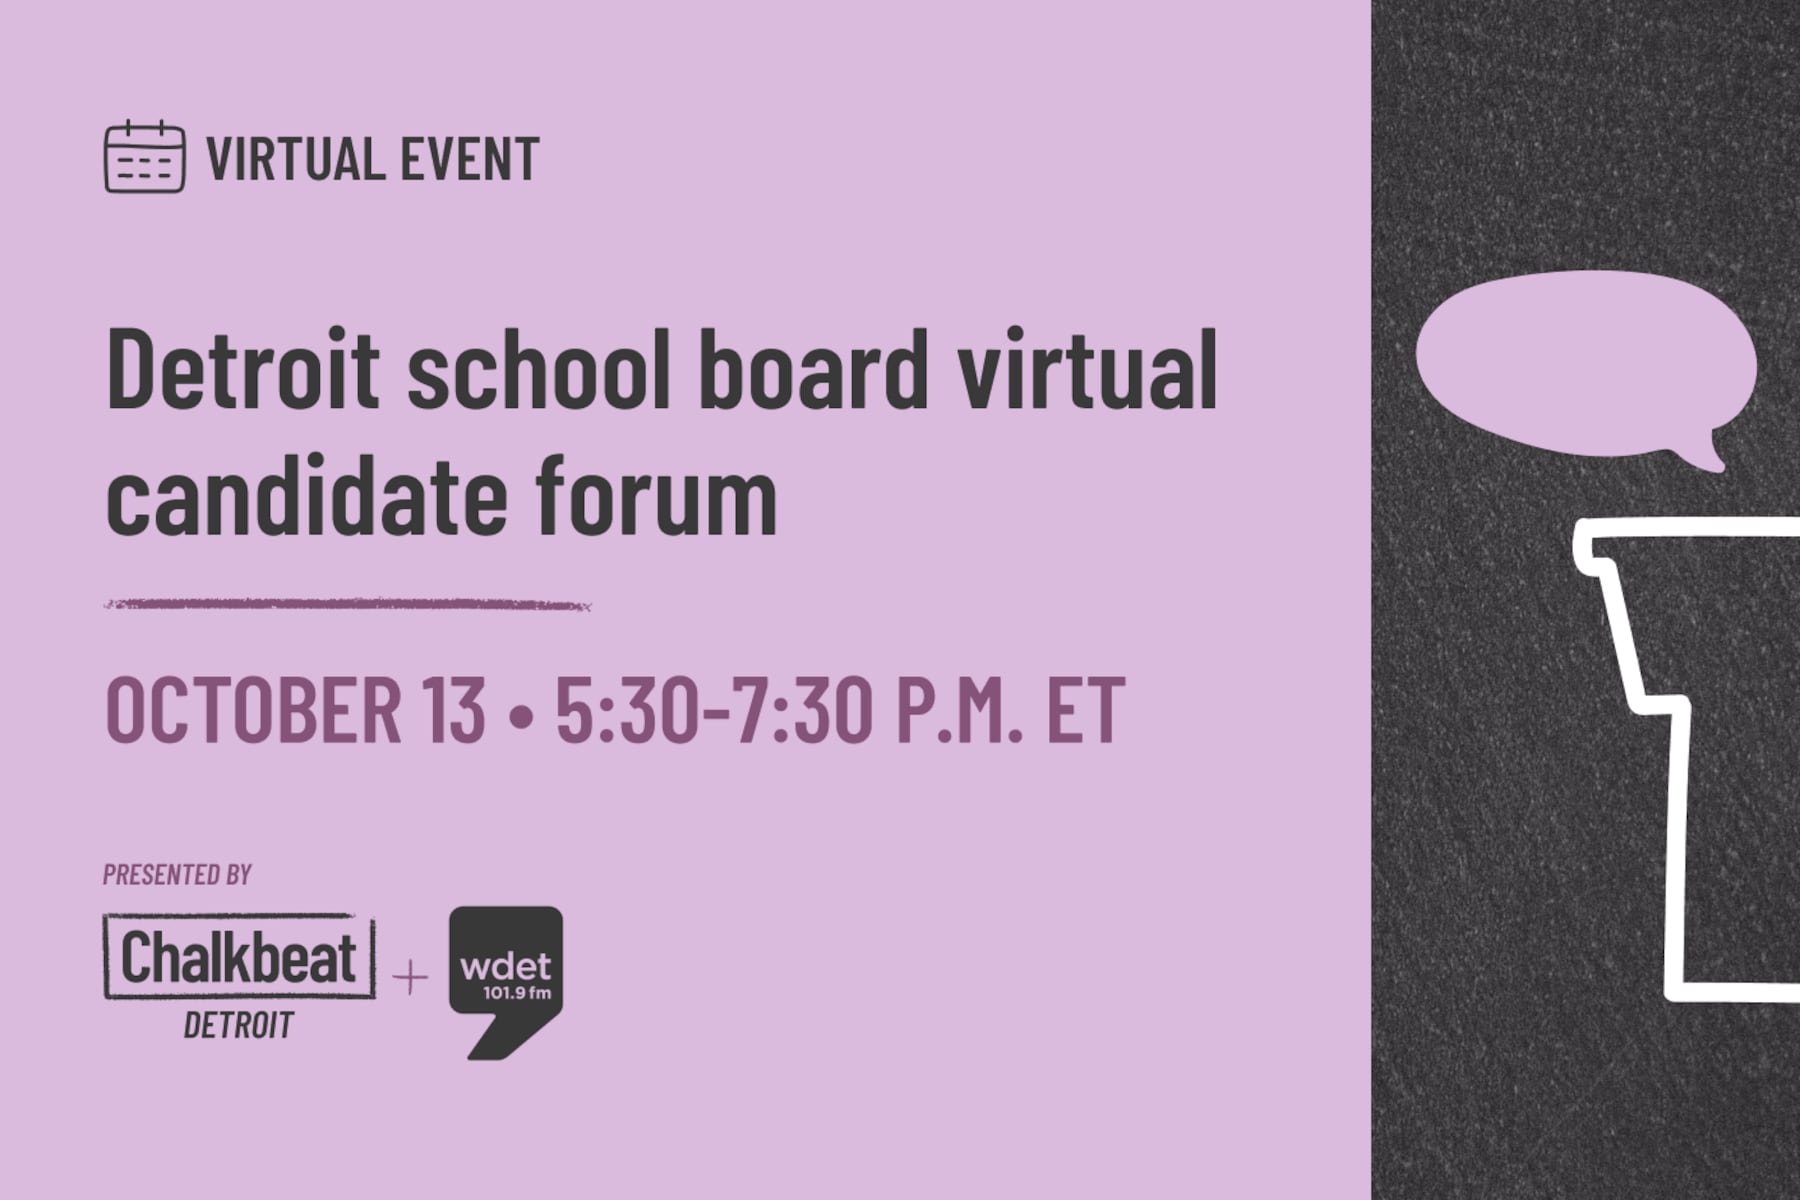 A promotional image for an event displays the title, “Detroit school board virtual candidate forum” in black against a purple background. 